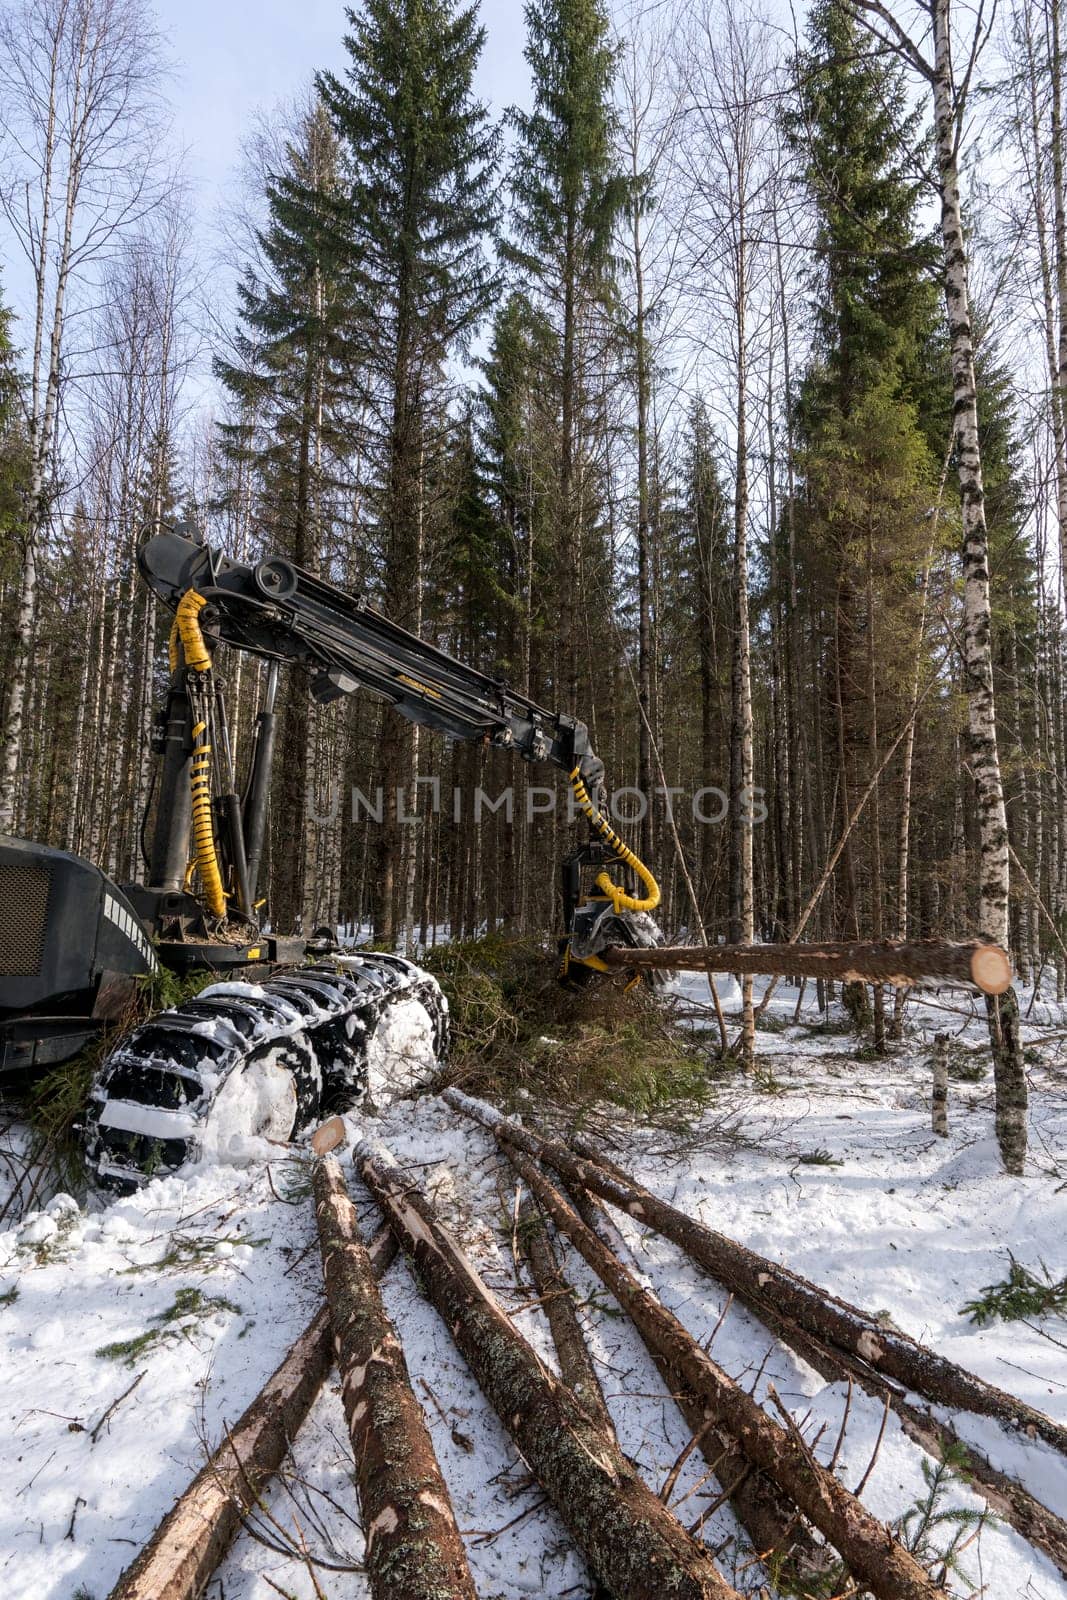 Image of log loader cutting tree in winter forest